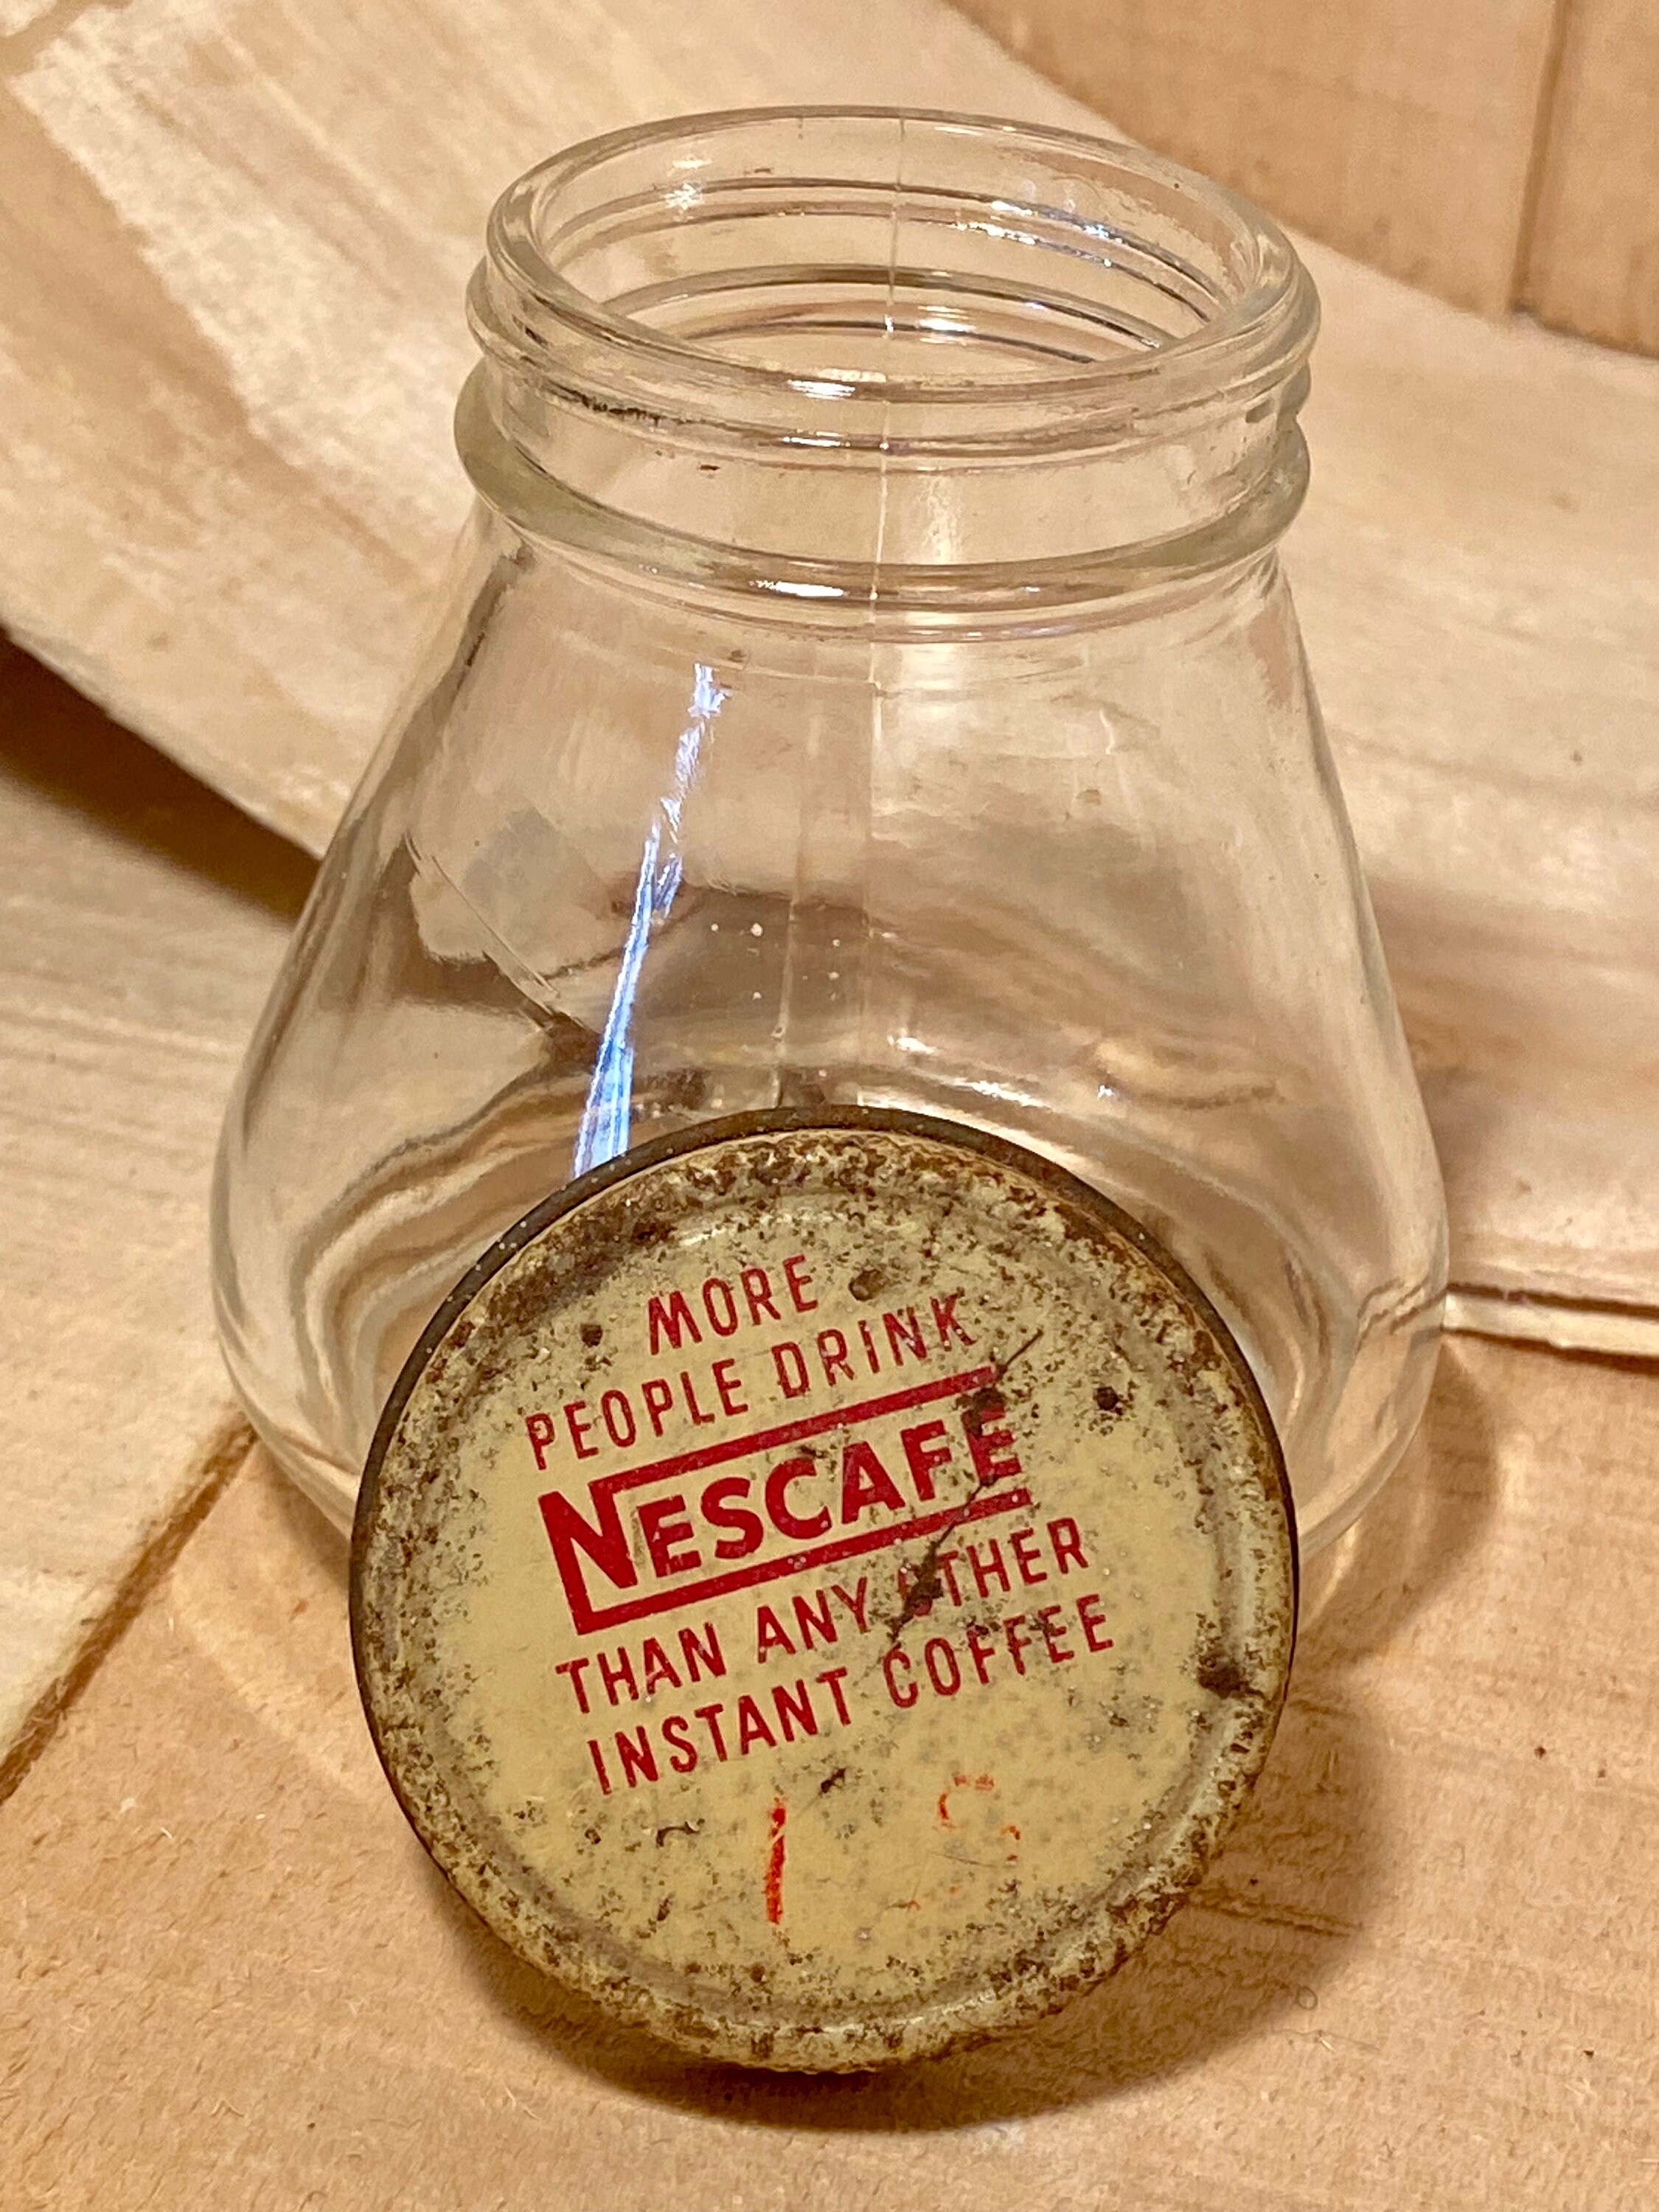 NesCafe instant coffee glass containers make perfect table vase